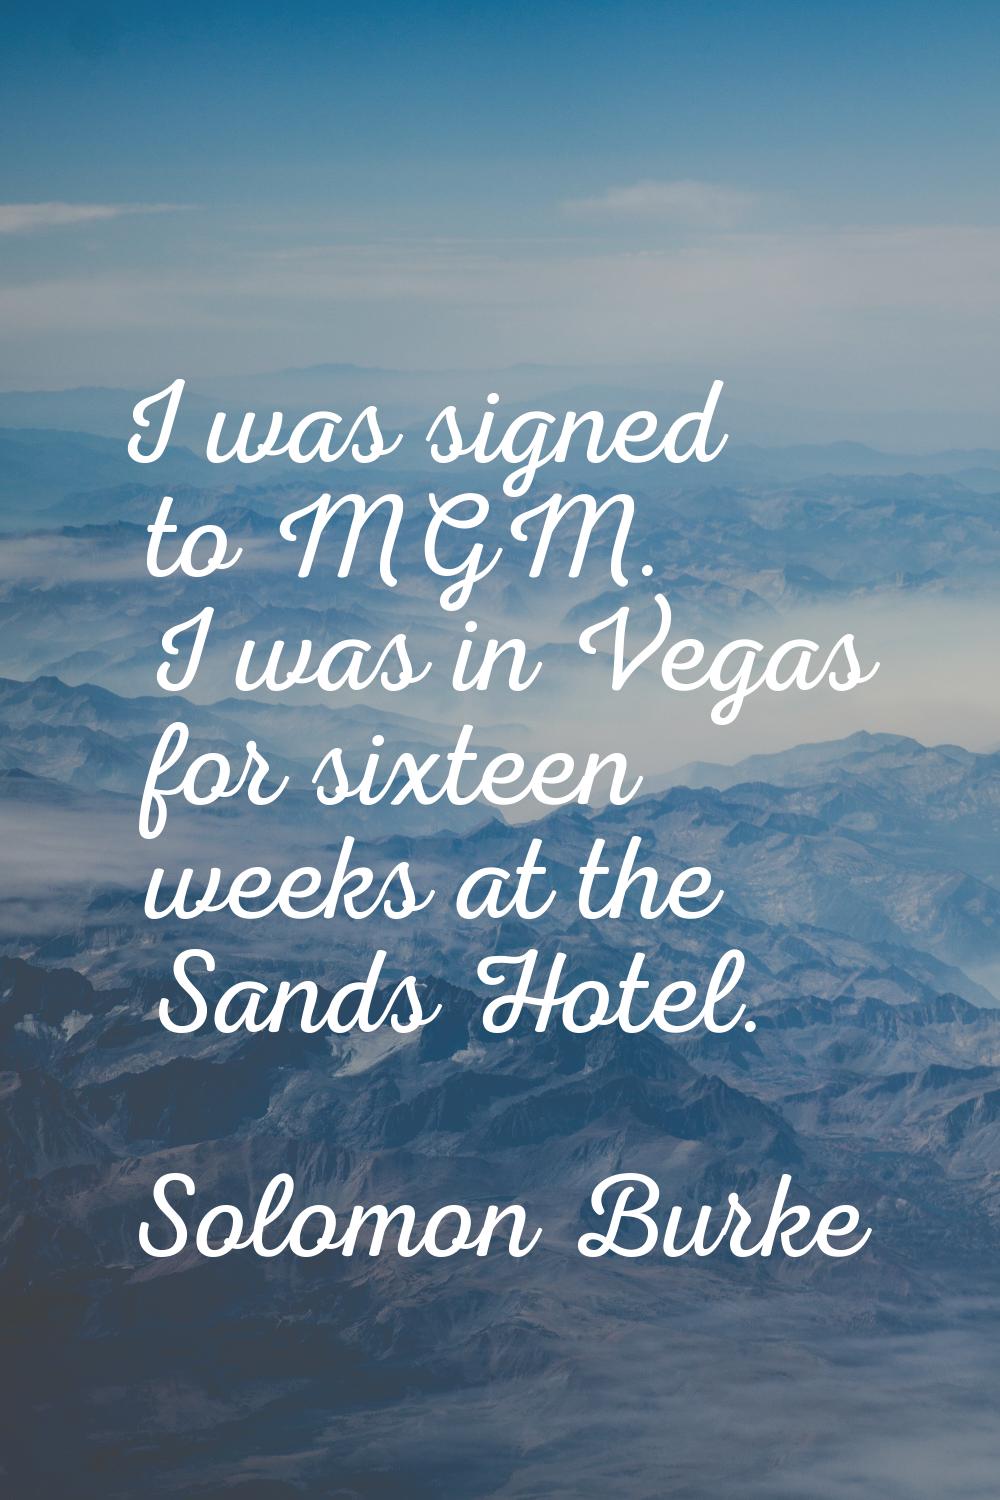 I was signed to MGM. I was in Vegas for sixteen weeks at the Sands Hotel.